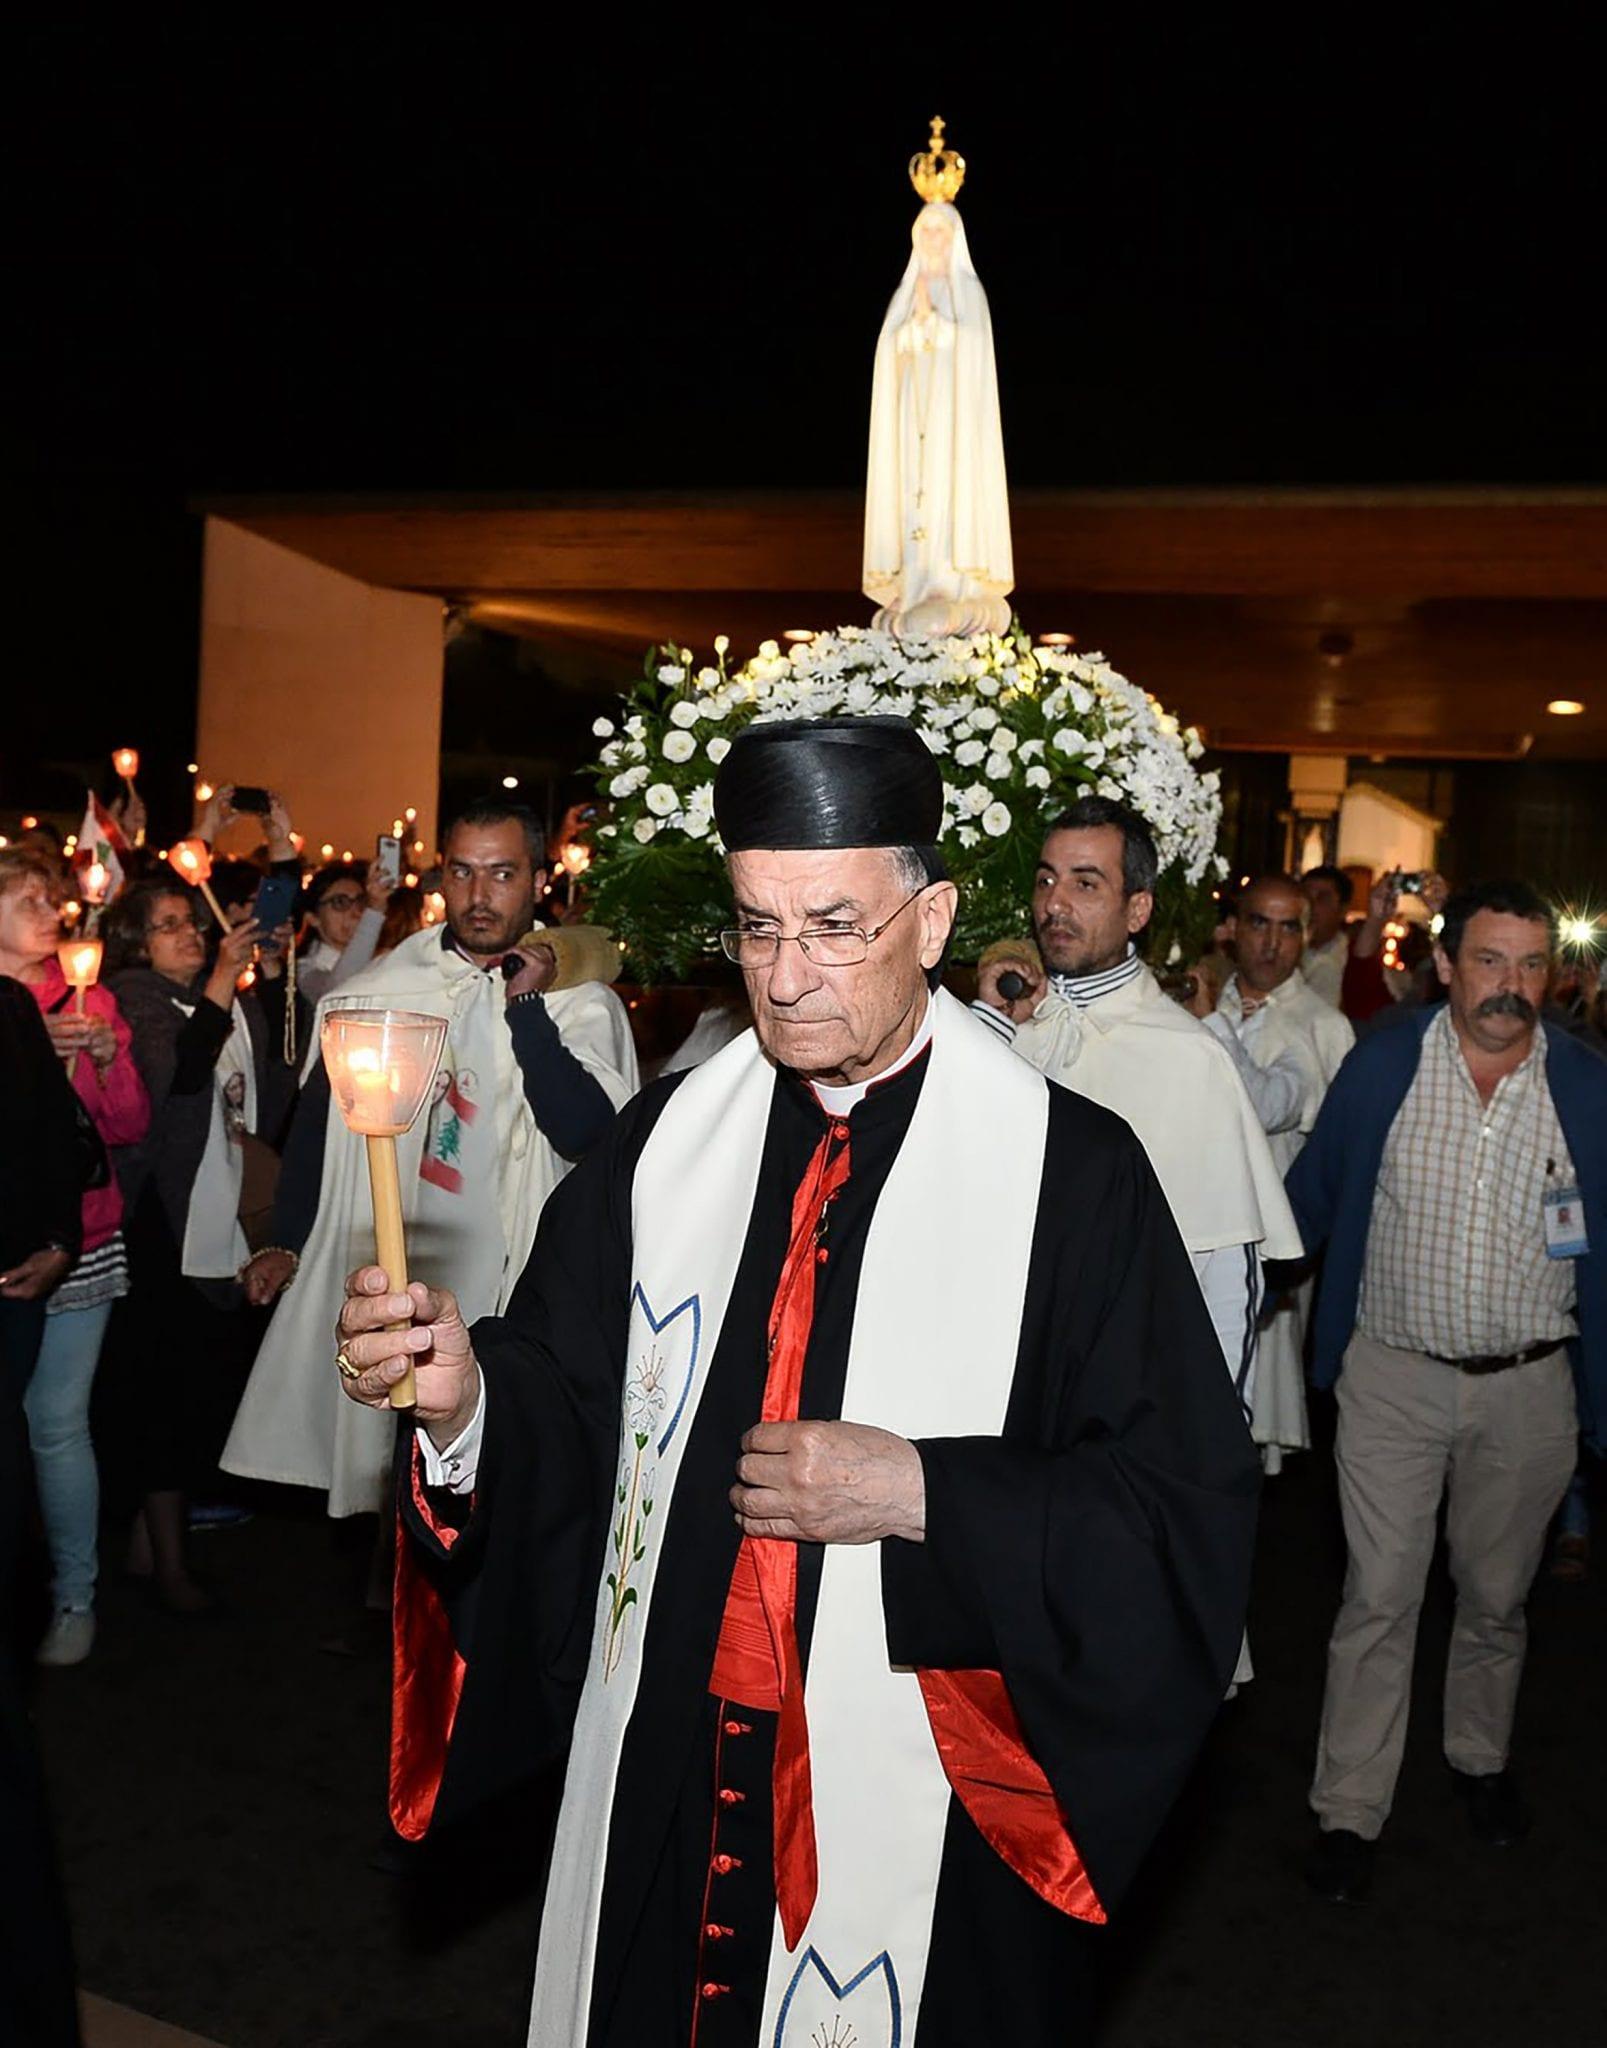 At Fatima, cardinal consecrates Lebanon, Middle East to Mary